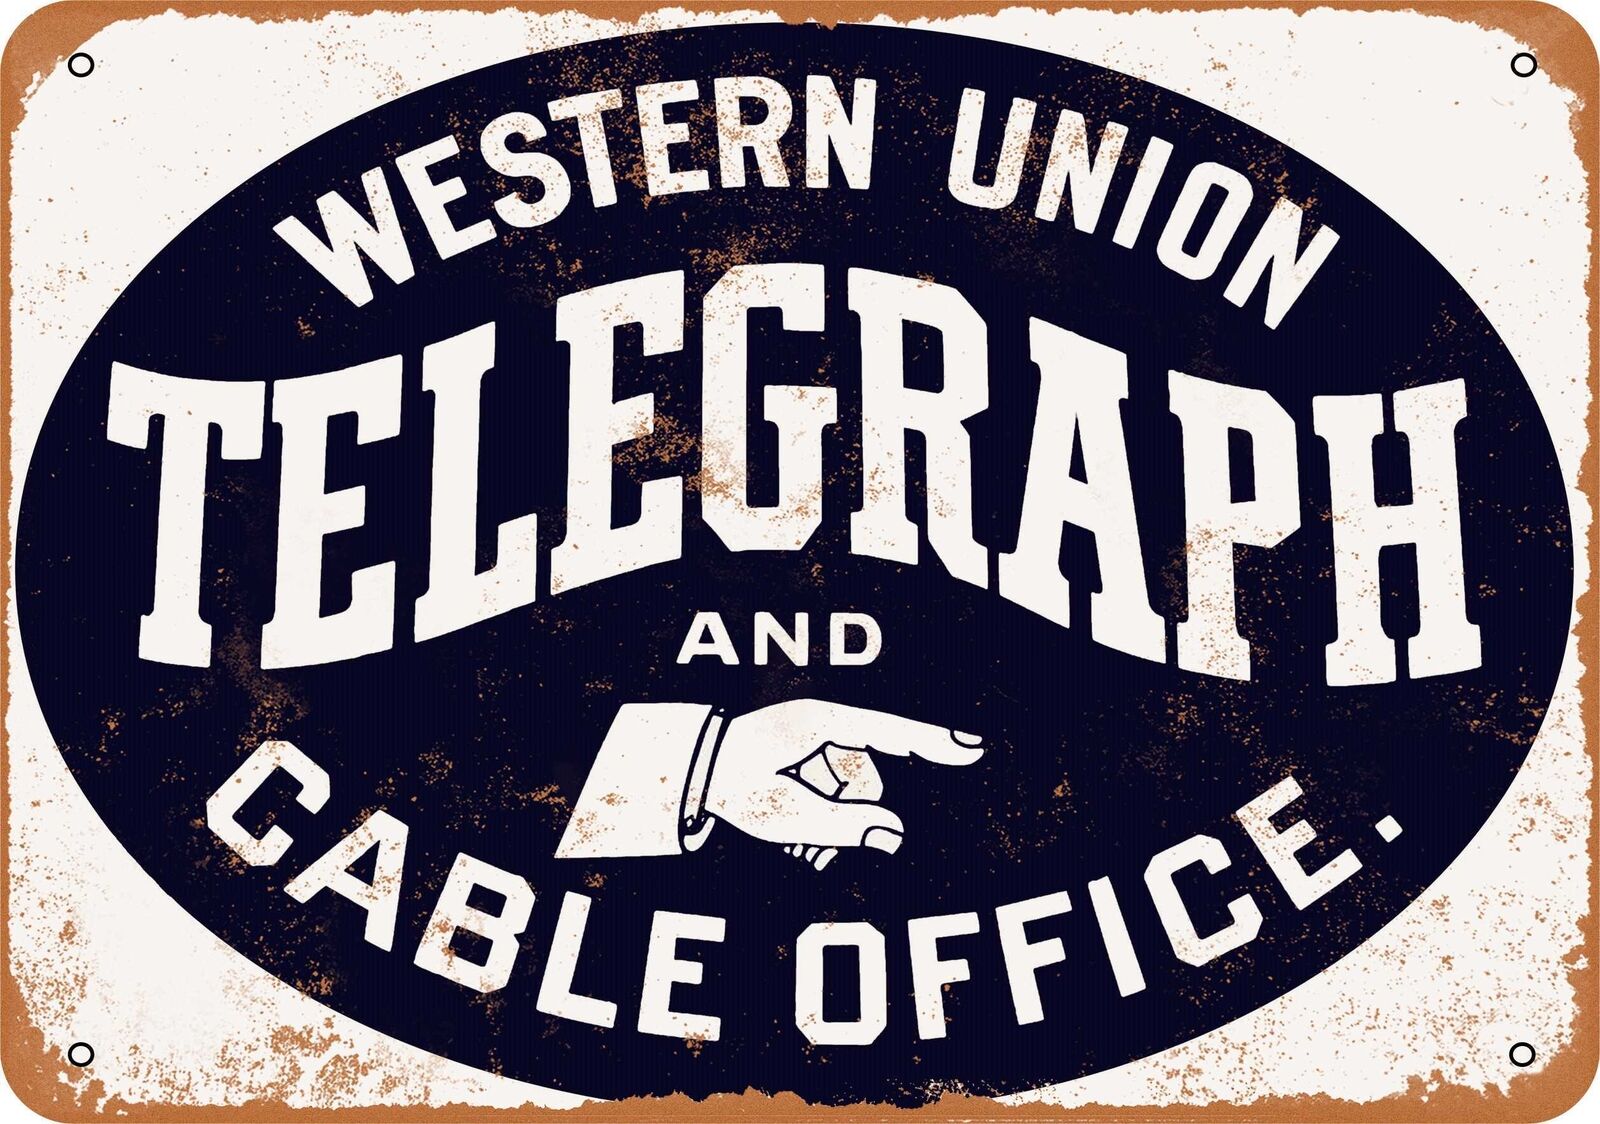 Metal Sign - Western Union Telegraph and Cable 2 - Vintage Look Reproduction